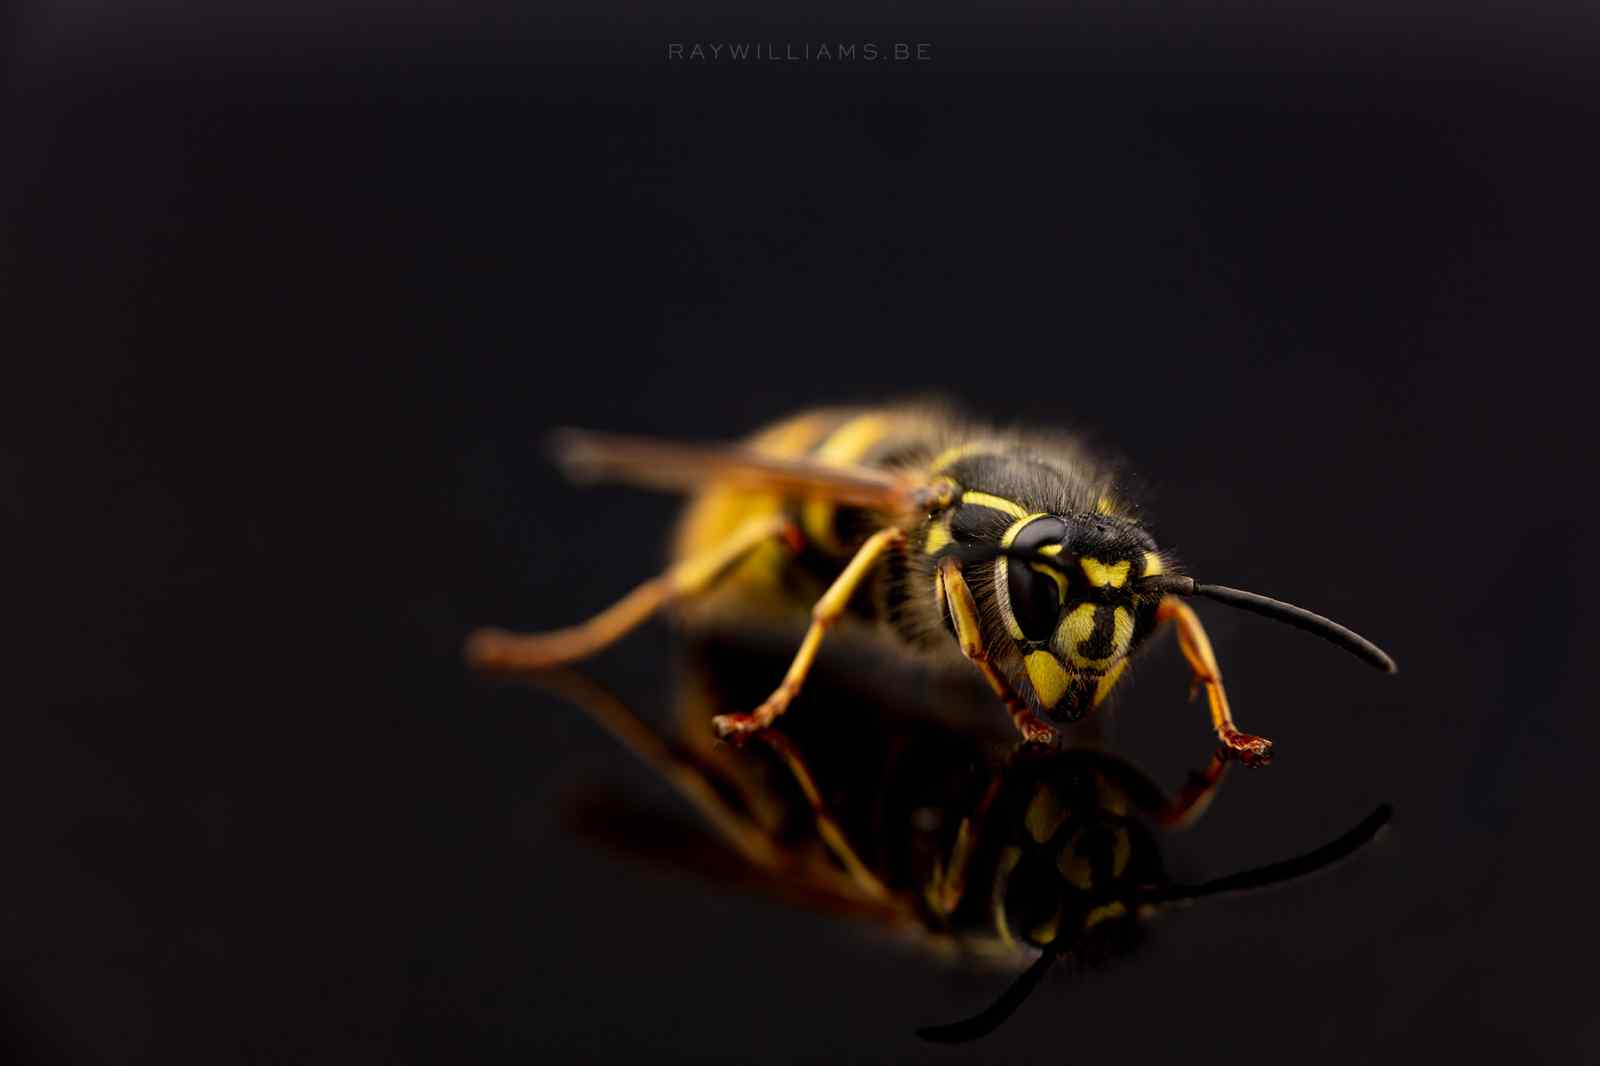 Queen wasp on the catwalk